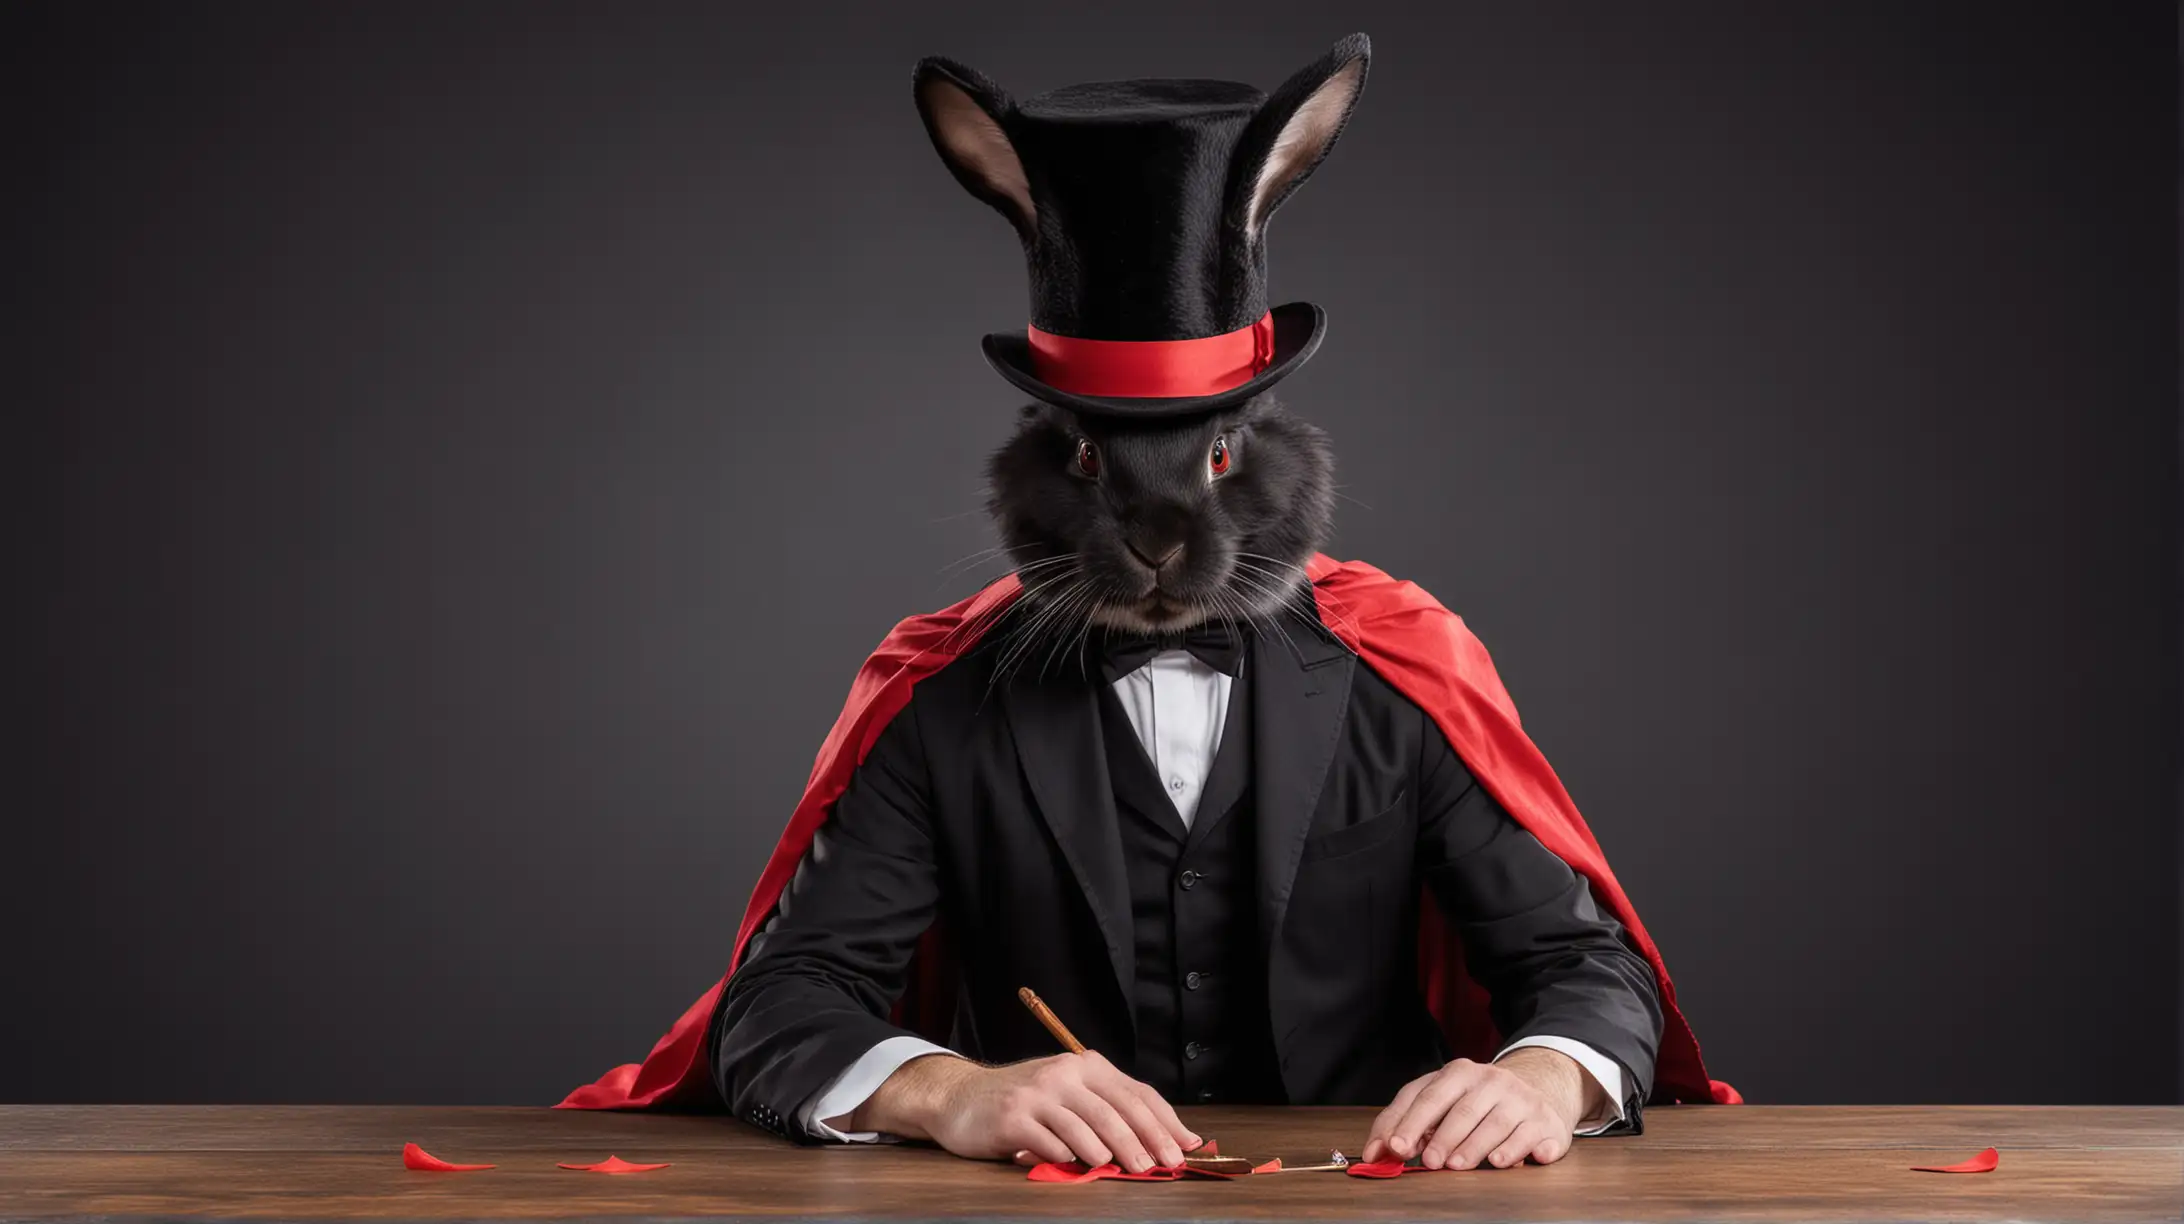 Magician in Black Suit with Red Cape Conjuring Bunny Magic